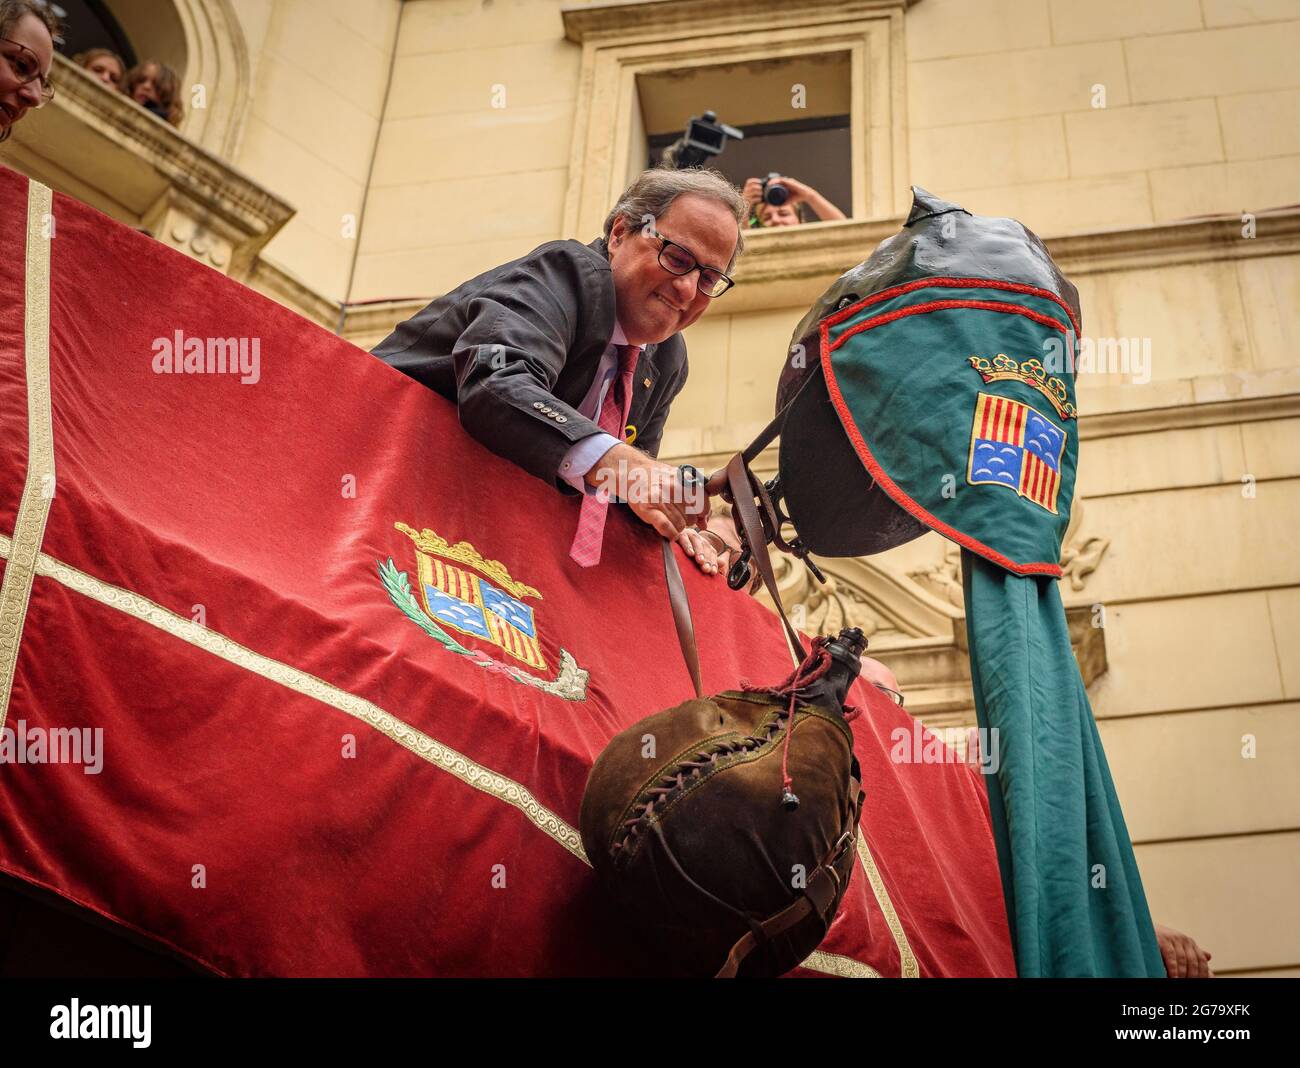 The Guita Grossa (large dragon) carrying the wineskin to the President of the Generalitat of Catalonia, Quim Torra, during the Patum de Berga (Spain) Stock Photo